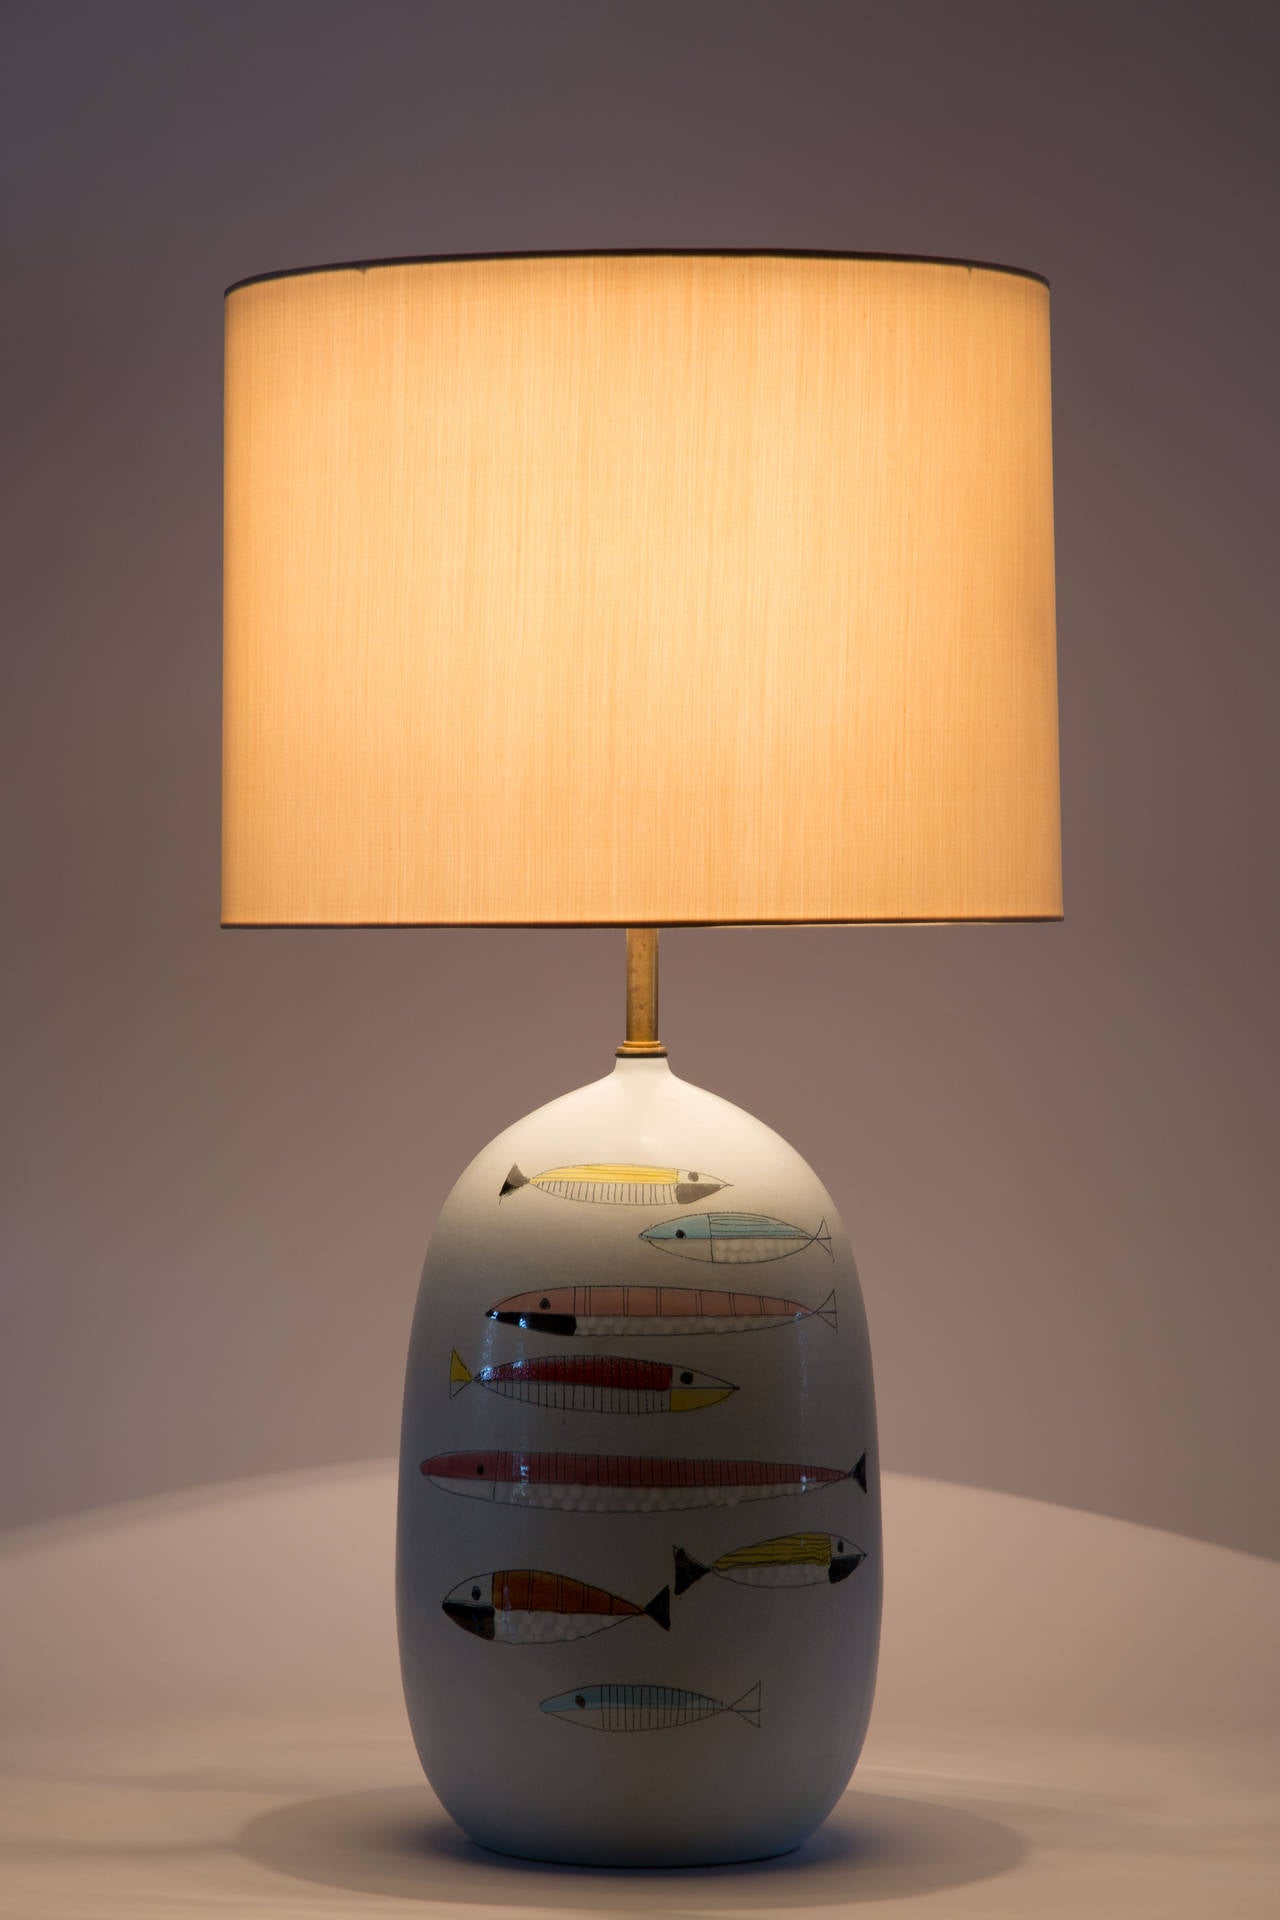 Rare hand thrown, ceramic table lamps designed by Raymor in Italy, circa 1950s. Shade not included. Custom shade fabrication available. Takes one E27 100w maximum bulb.